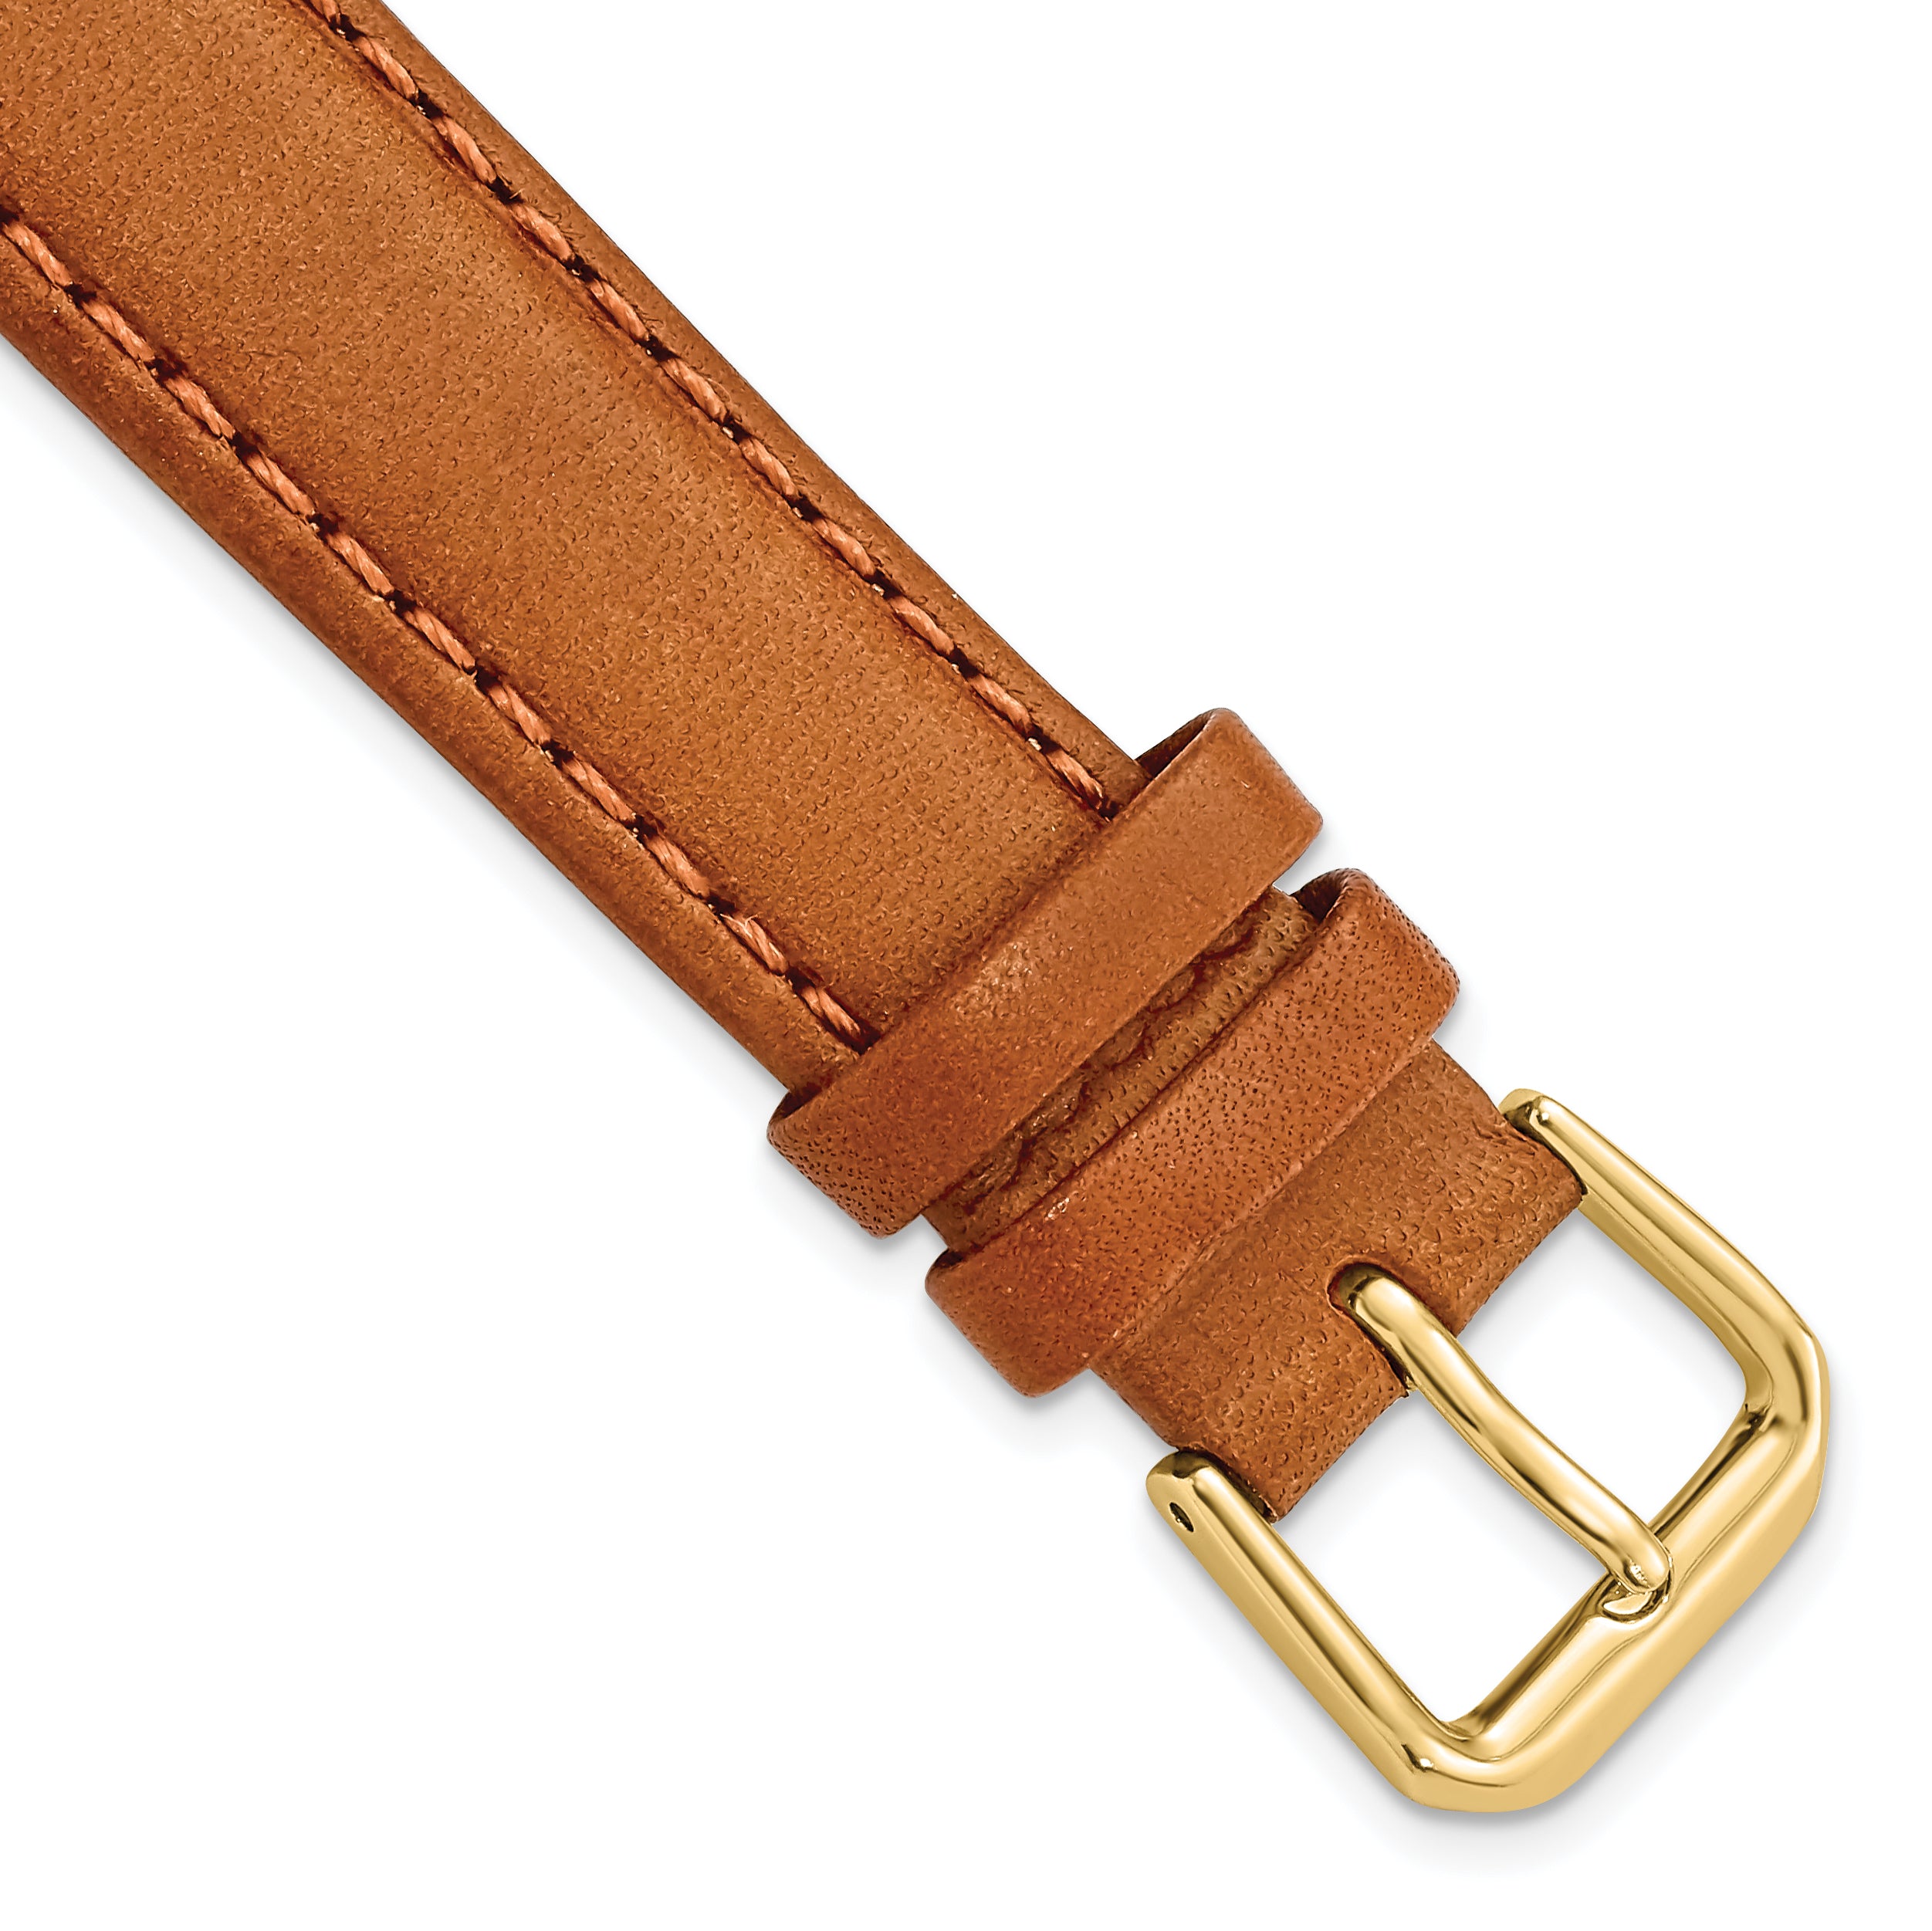 DeBeer 16mm Havana Italian Leather with Gold-tone Buckle 7.5 inch Watch Band